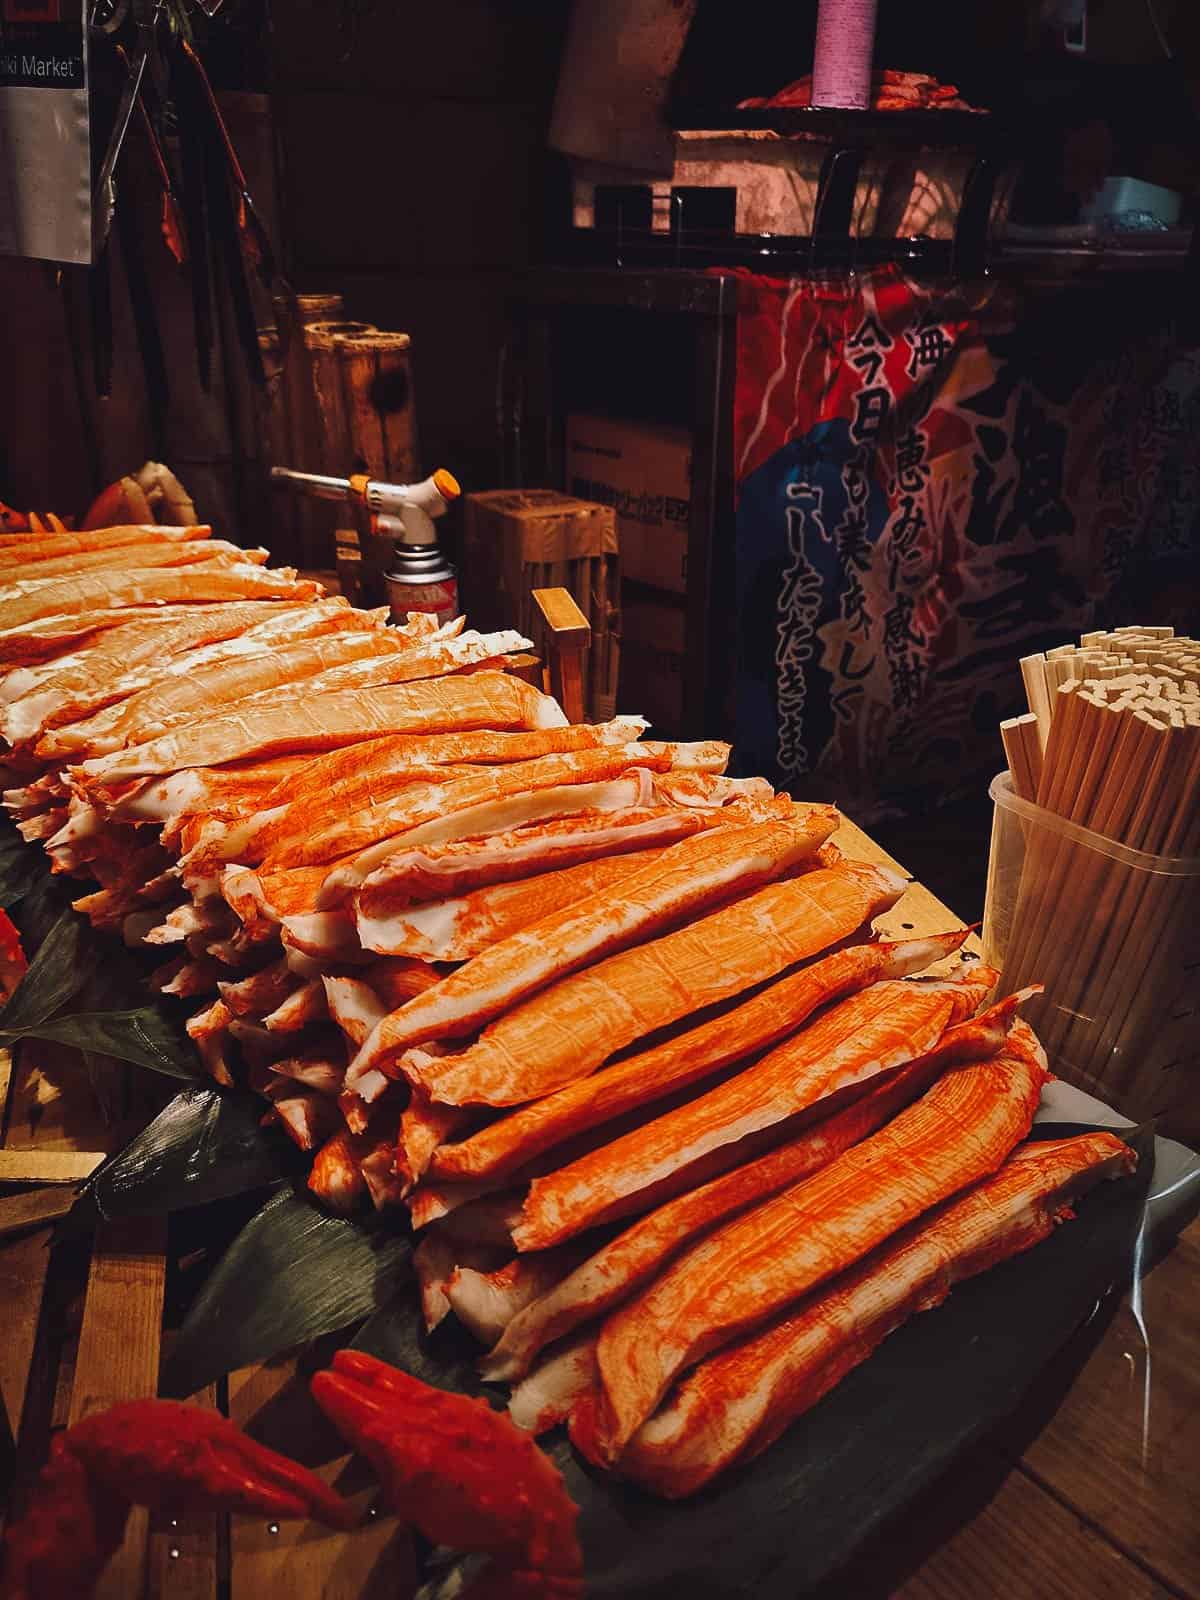 Crab legs at a market in Kyoto